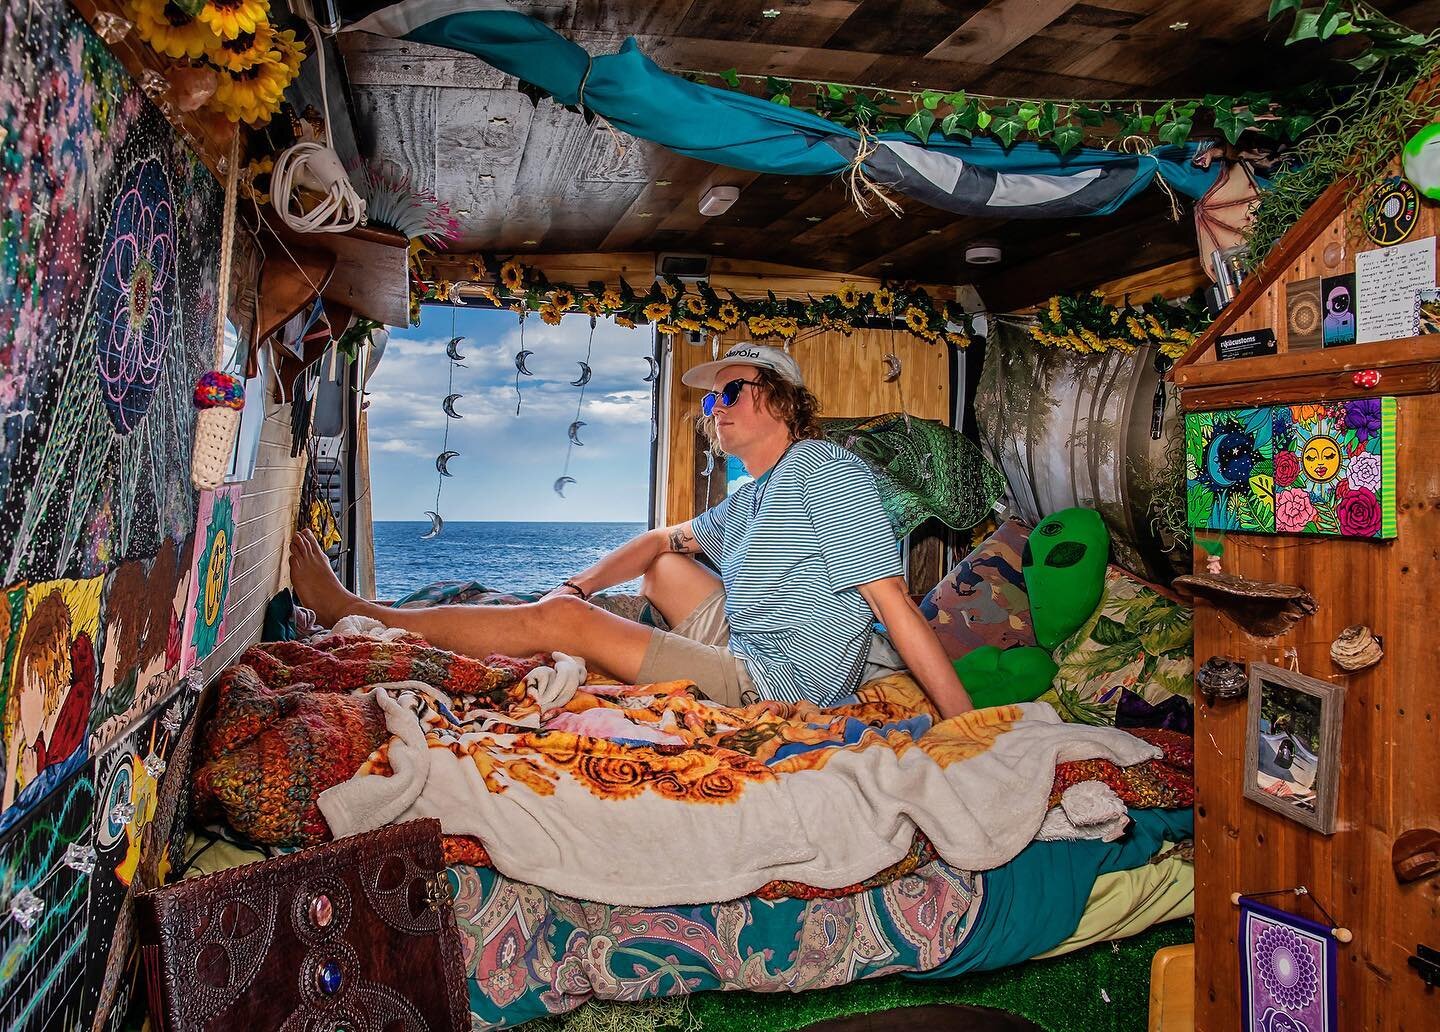 American Bedroom- Cody age 27- Hampton Beach, New Hampshire &lsquo;My life is all about expanding consciousness. Traveling in my van &lsquo;Gaia&rsquo; allows me to share her beauty and the hard work it took to create her. It brings forth a perspecti